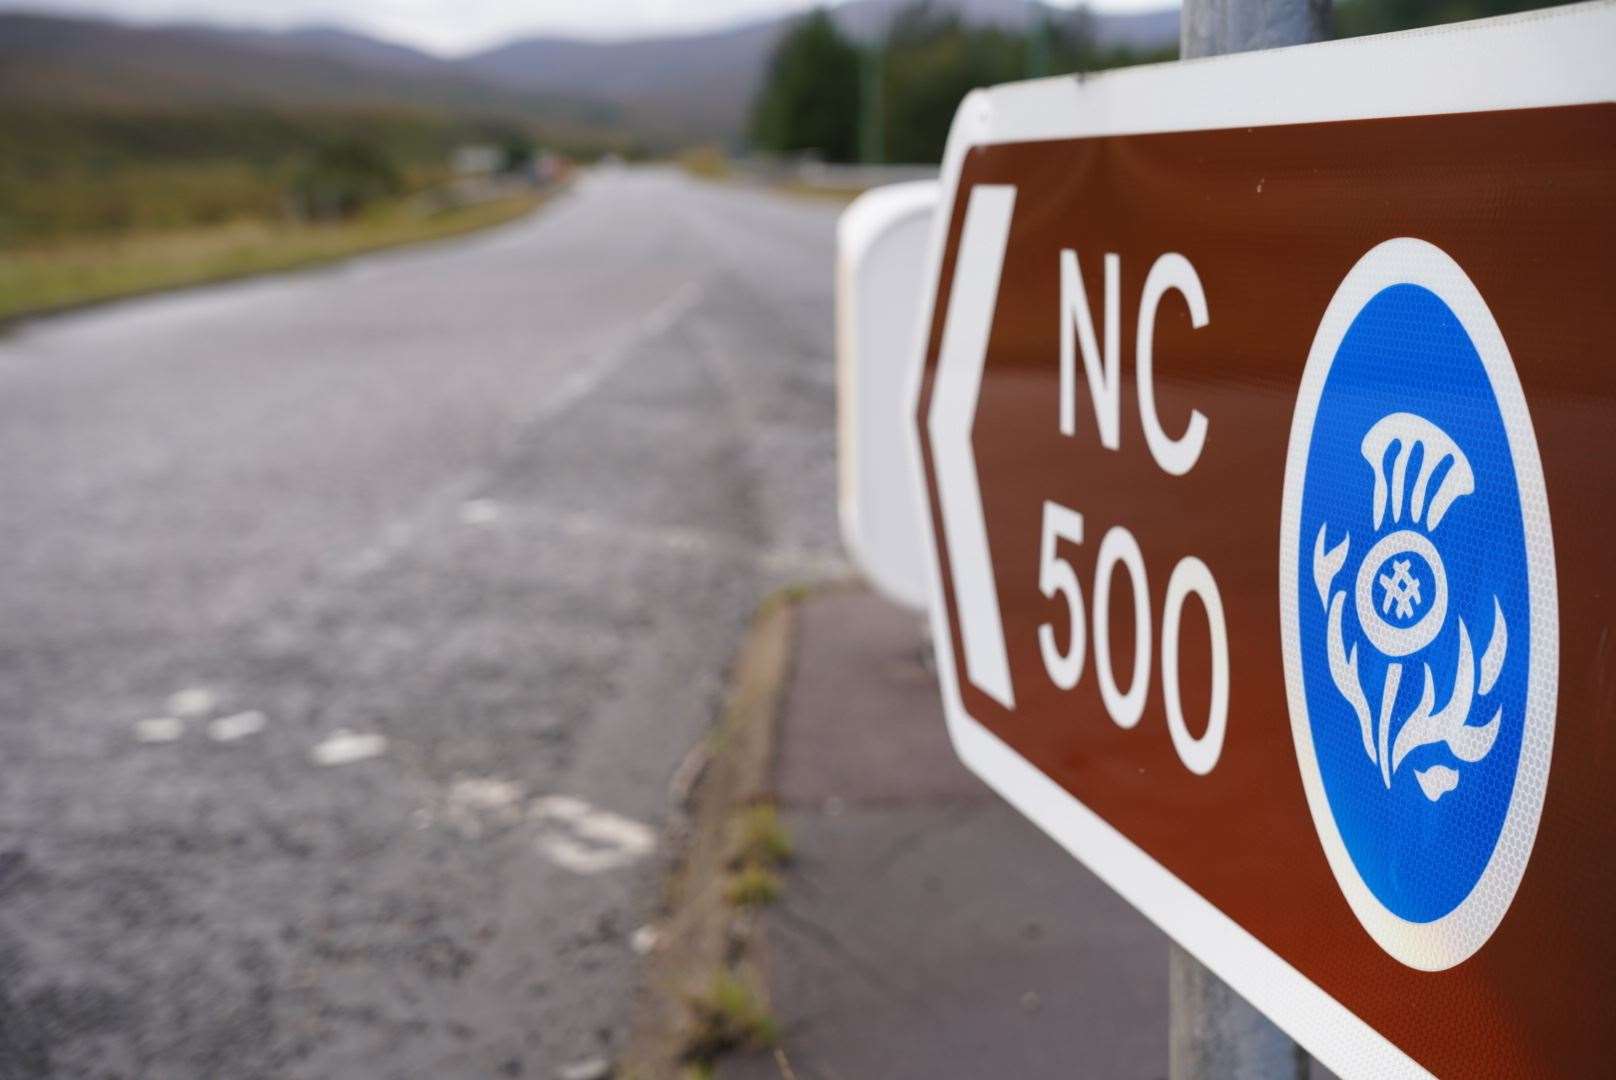 The North Coast 500 is giving businesses in the northern Highlands a boost over the rest of the region.